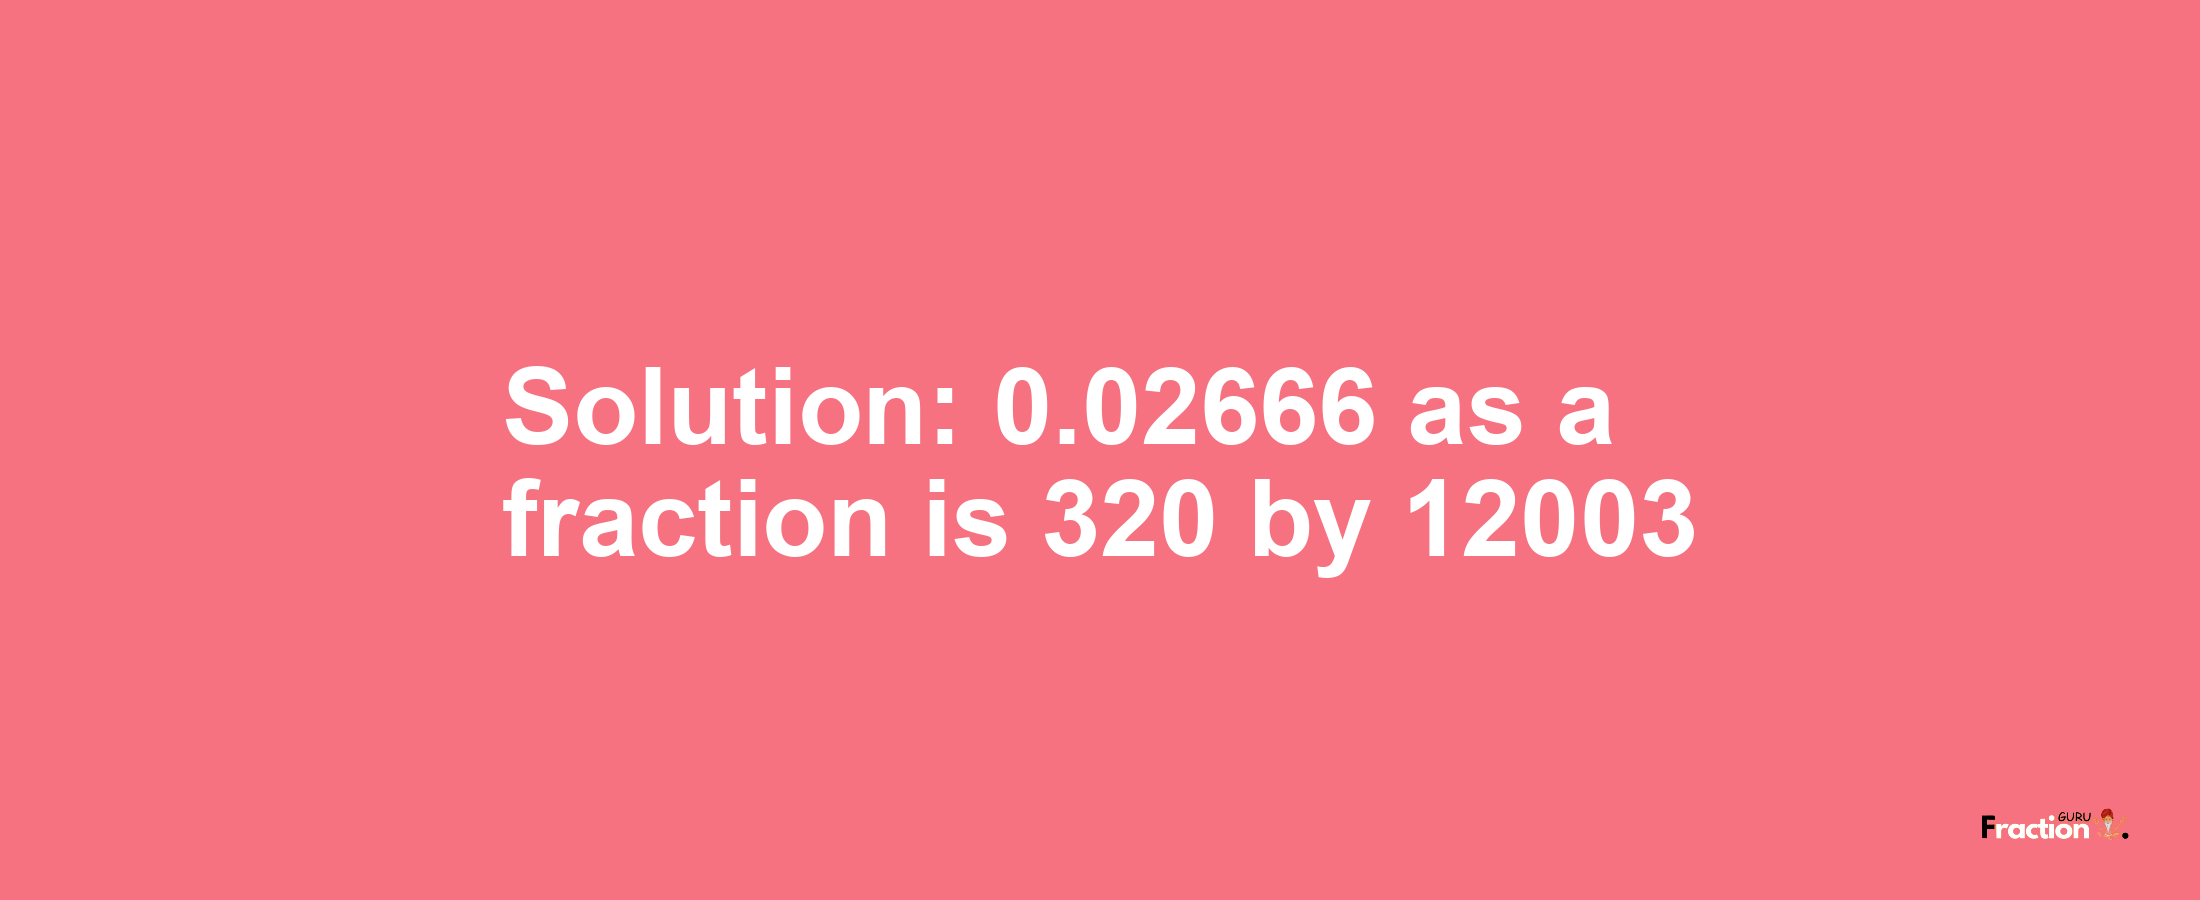 Solution:0.02666 as a fraction is 320/12003